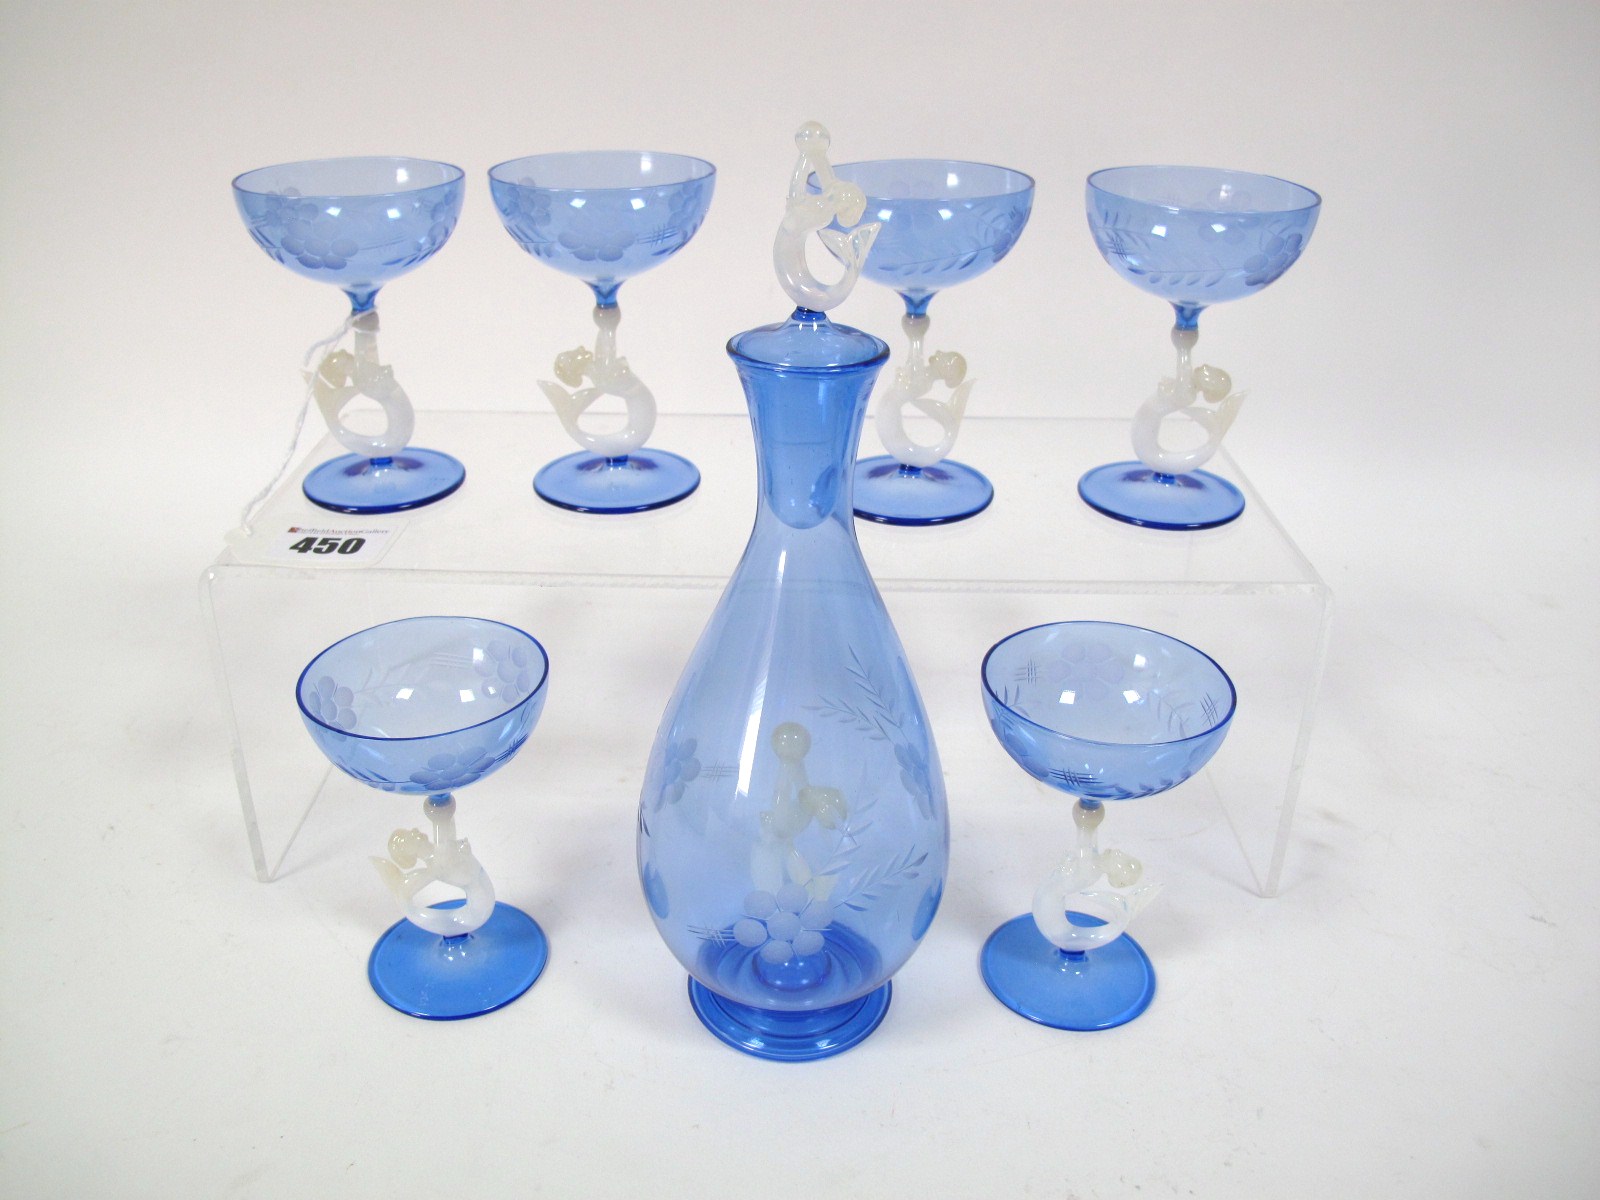 A Mid XX Century Vintage Bimini Werkstatte Cocktail Set, in pale blue, the footed baluster